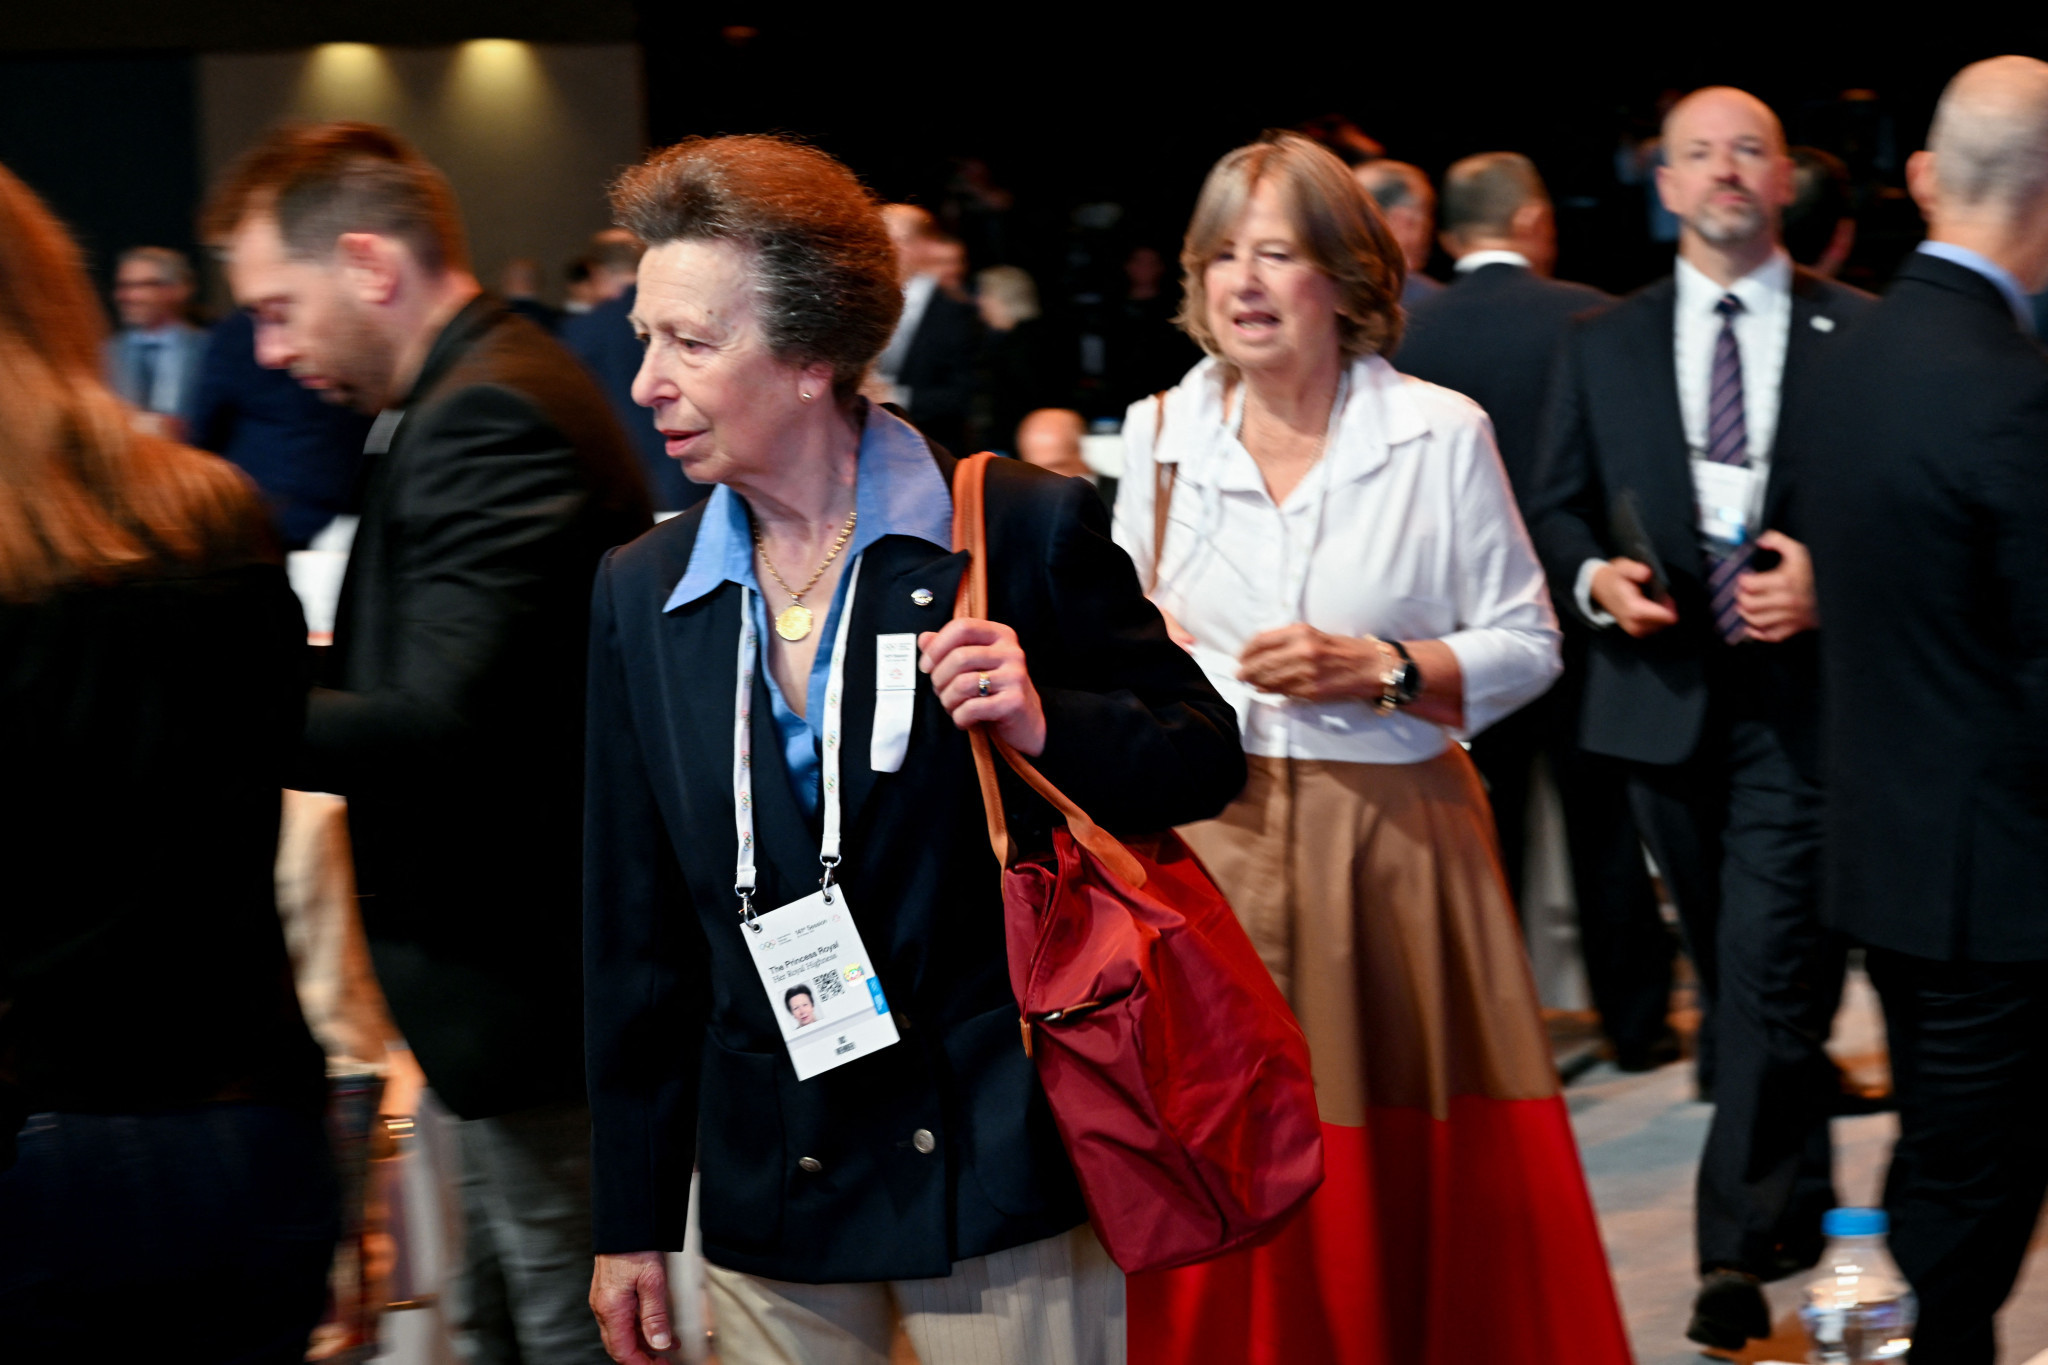 Britain's Princess Anne was among the IOC members in attendance at the Session in Mumbai ©Getty Images